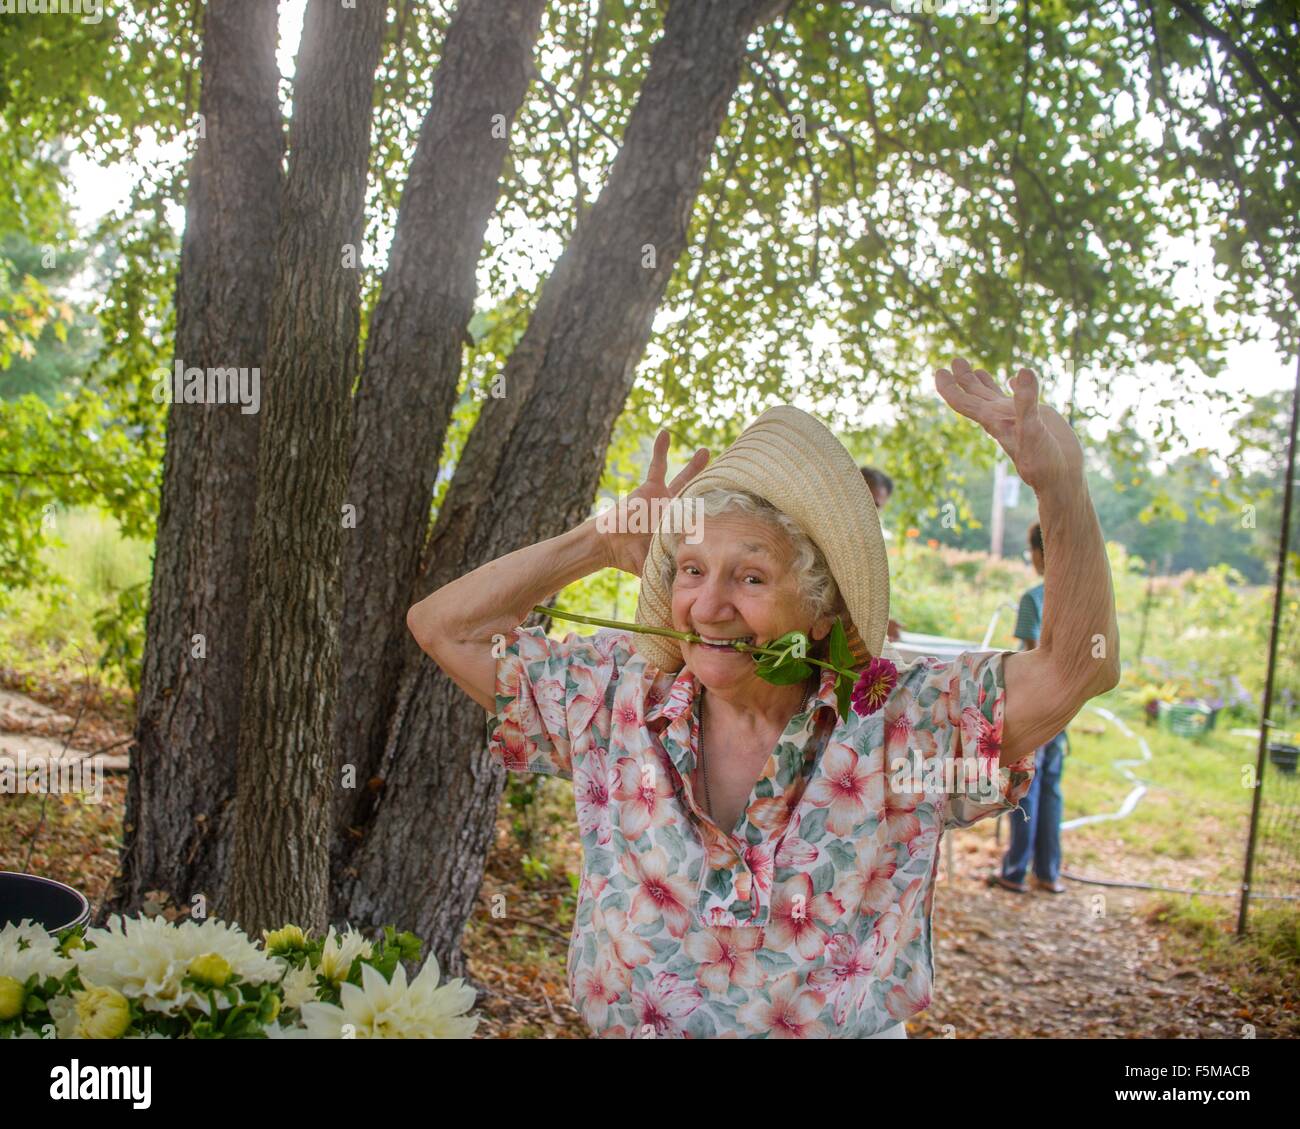 Senior woman with flower in bouche dancing on farm Banque D'Images